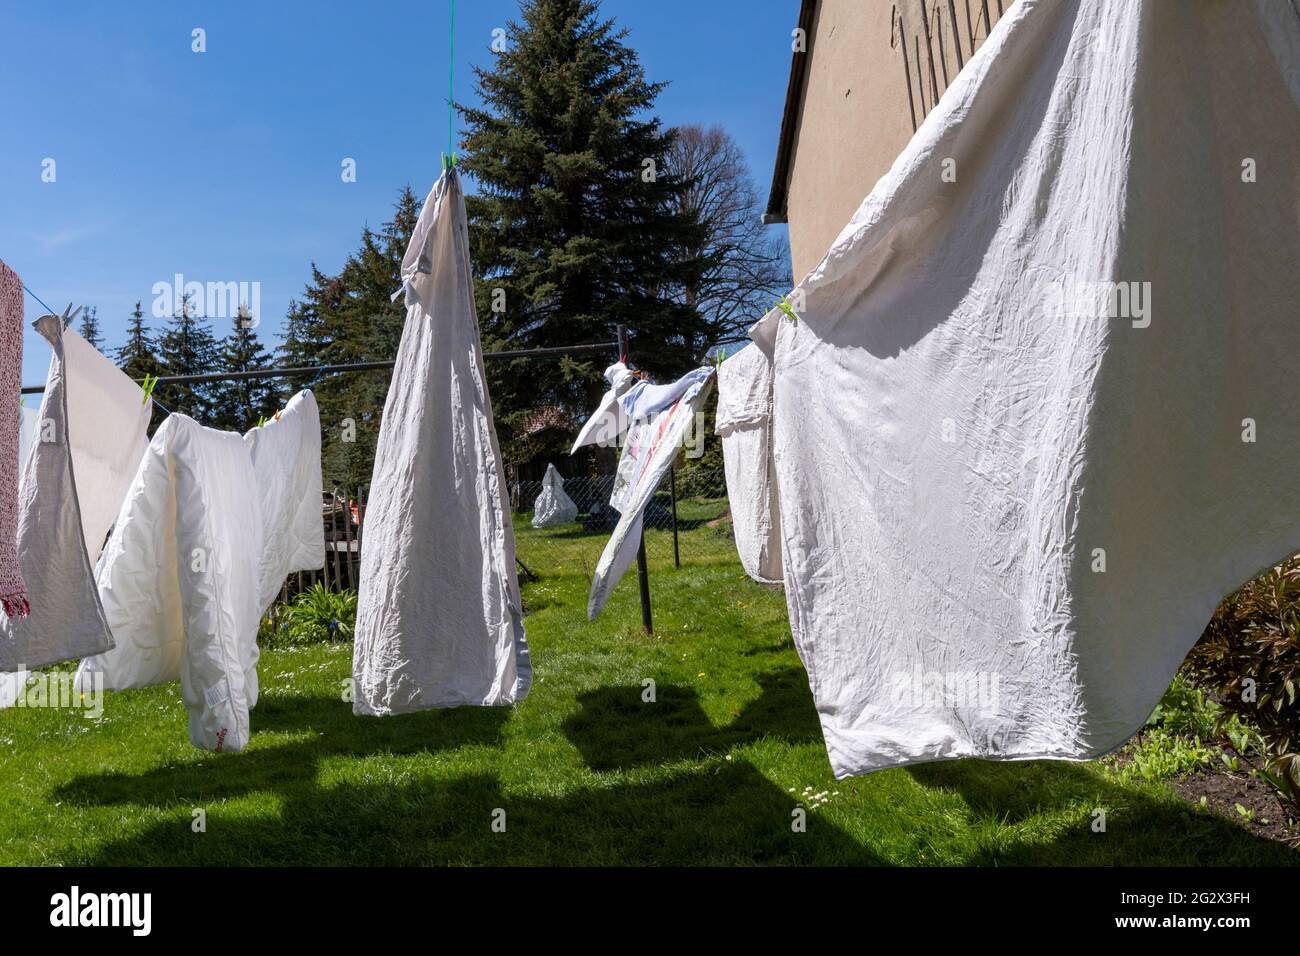 Laundry Drying On The Rope Outside Stock Photo